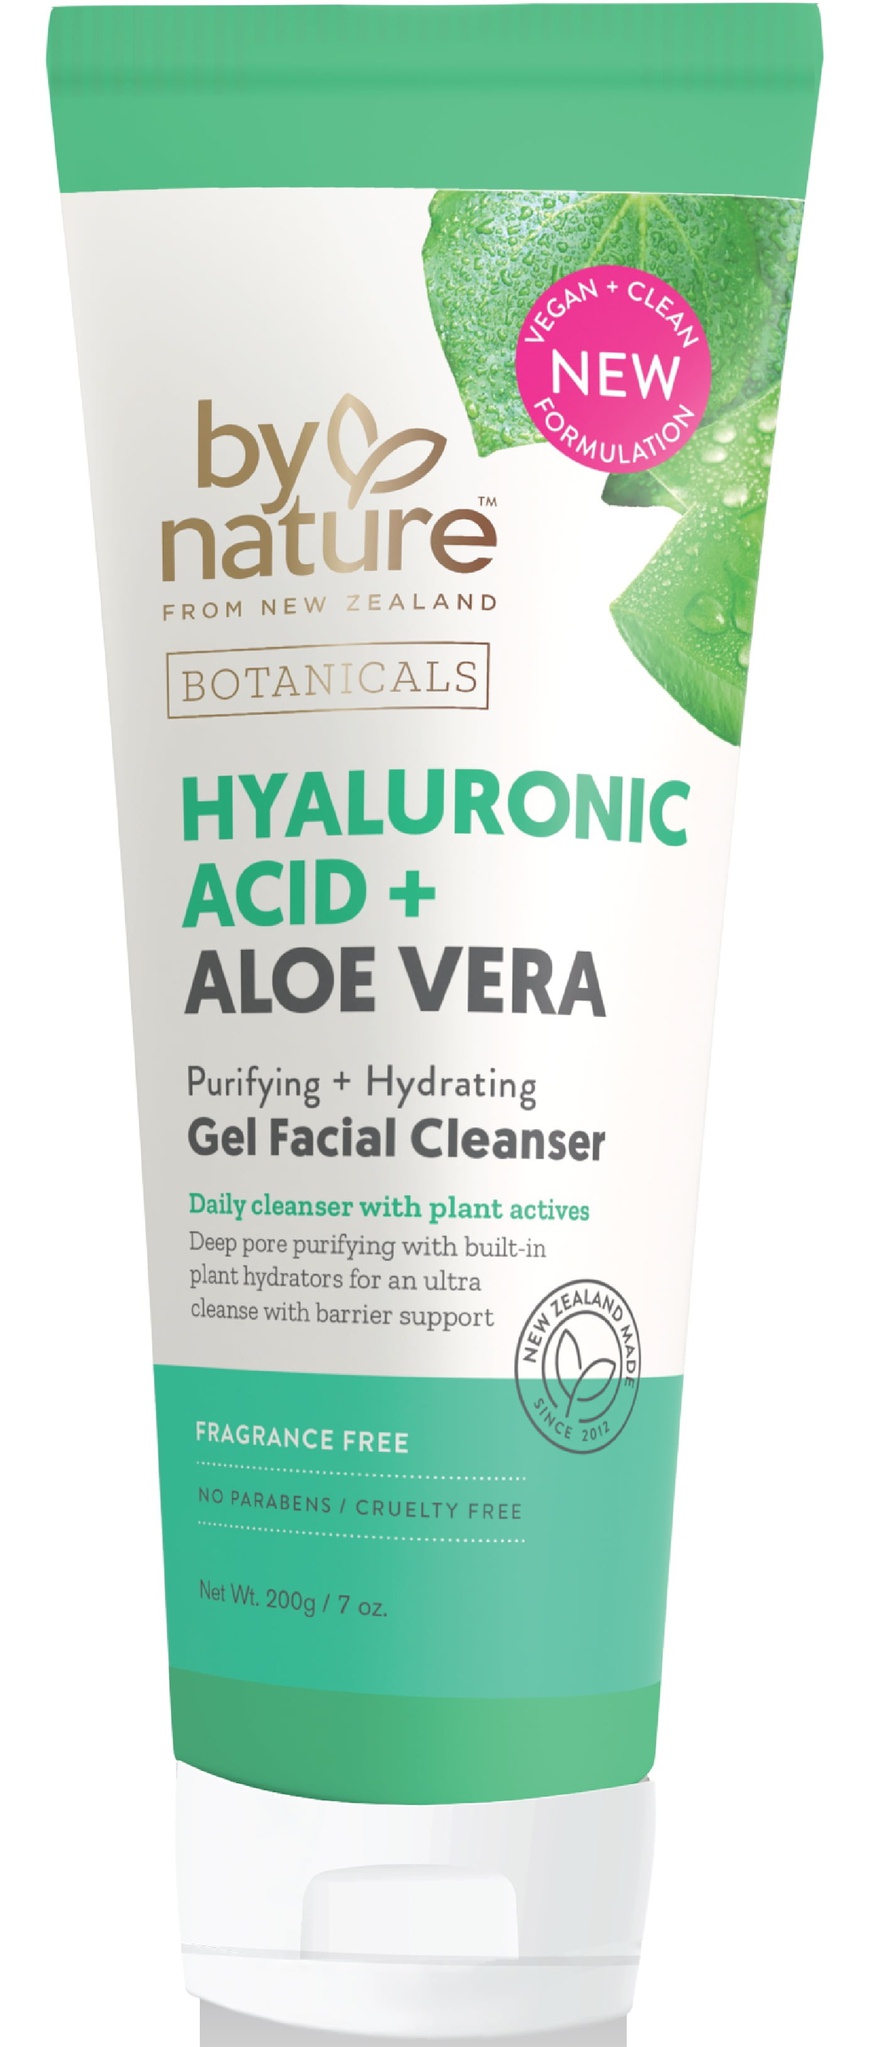 By Nature Hyaluronic Acid + Aloe Vera Purifying & Hydrating Gel Facial Cleanser